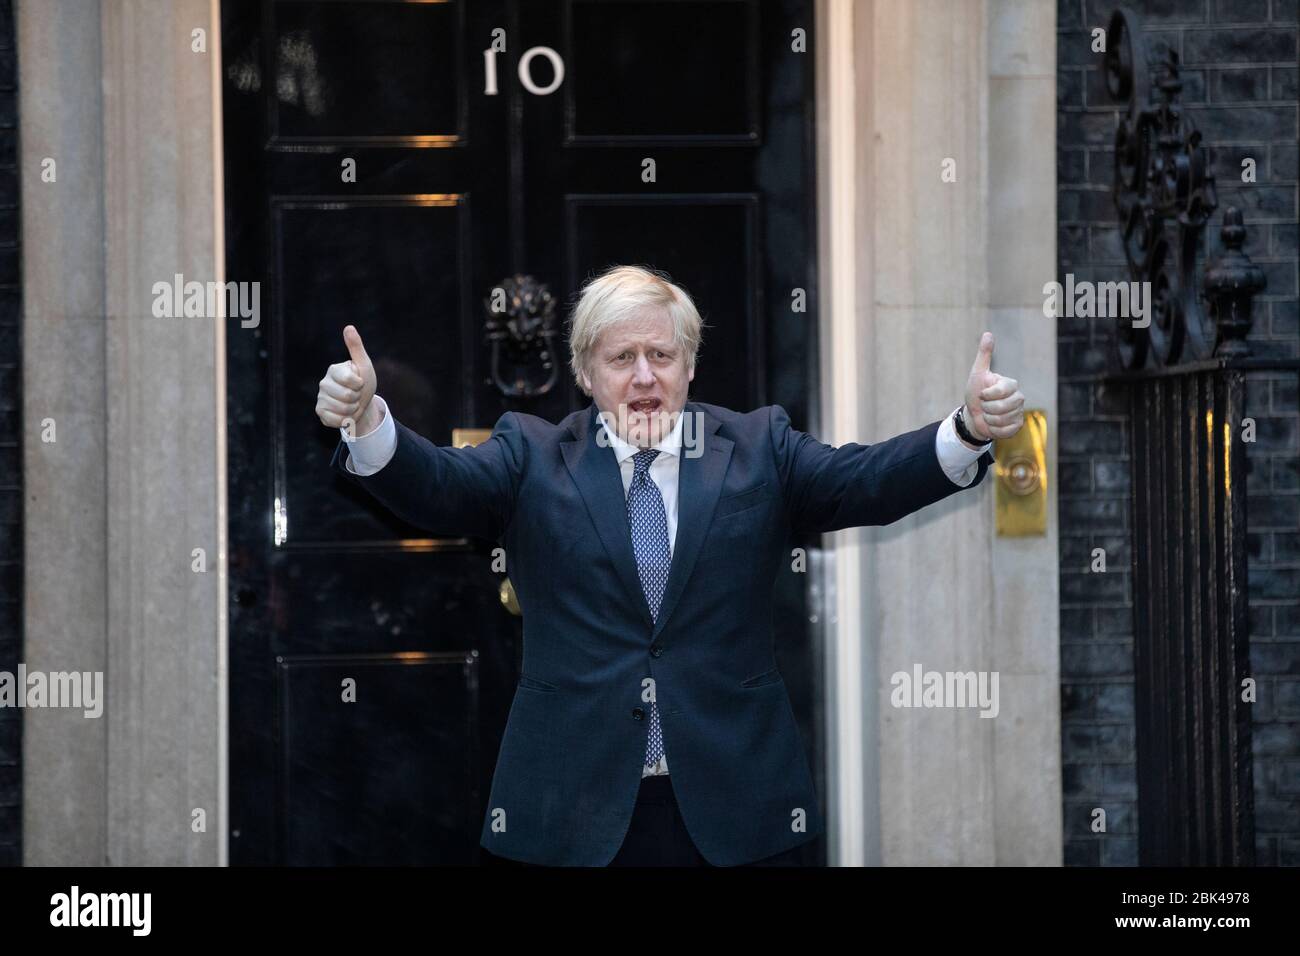 London, UK. 30th Apr 2020. London, UK. 30th Apr 2020. UK Prime Minister Boris Johnson takes part in this weeks 'Clap for our Carers' on the steps of No.10 Downing Street in a week that his fiancée Carrie Symonds gave birth to their baby son in a London NHS hospital. 30th April 2020. Downing Street, London, UK Credit: Jeff Gilbert/Alamy Live News Stock Photo